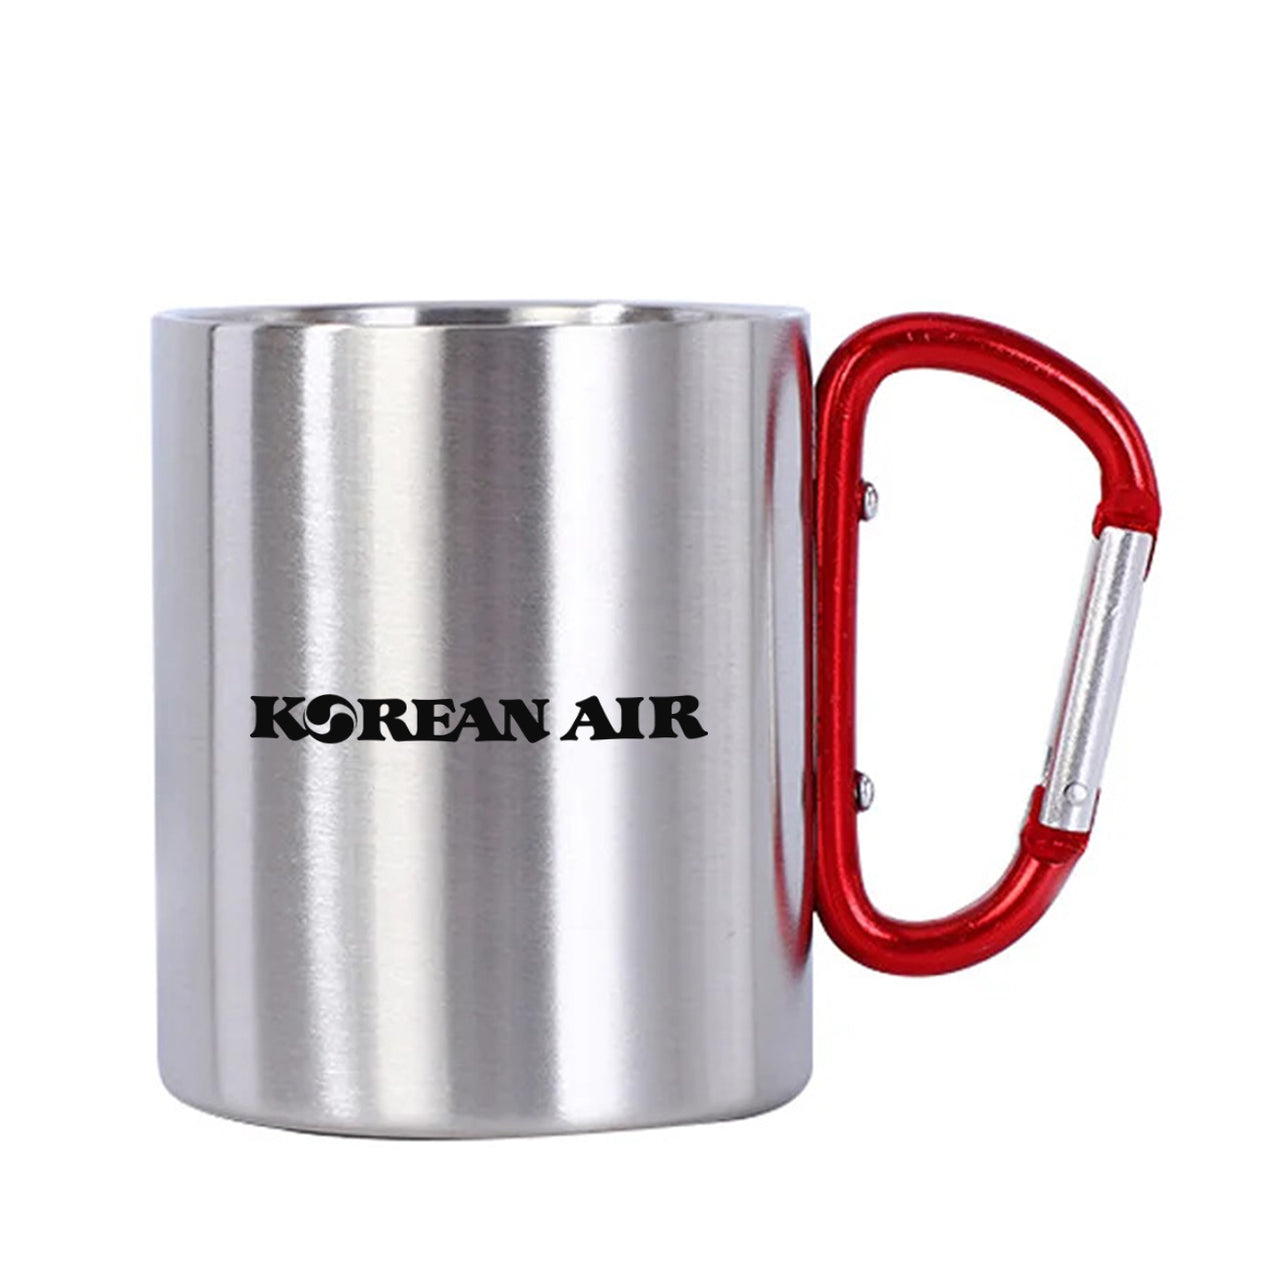 Korean Airlines Designed Stainless Steel Outdoors Mugs